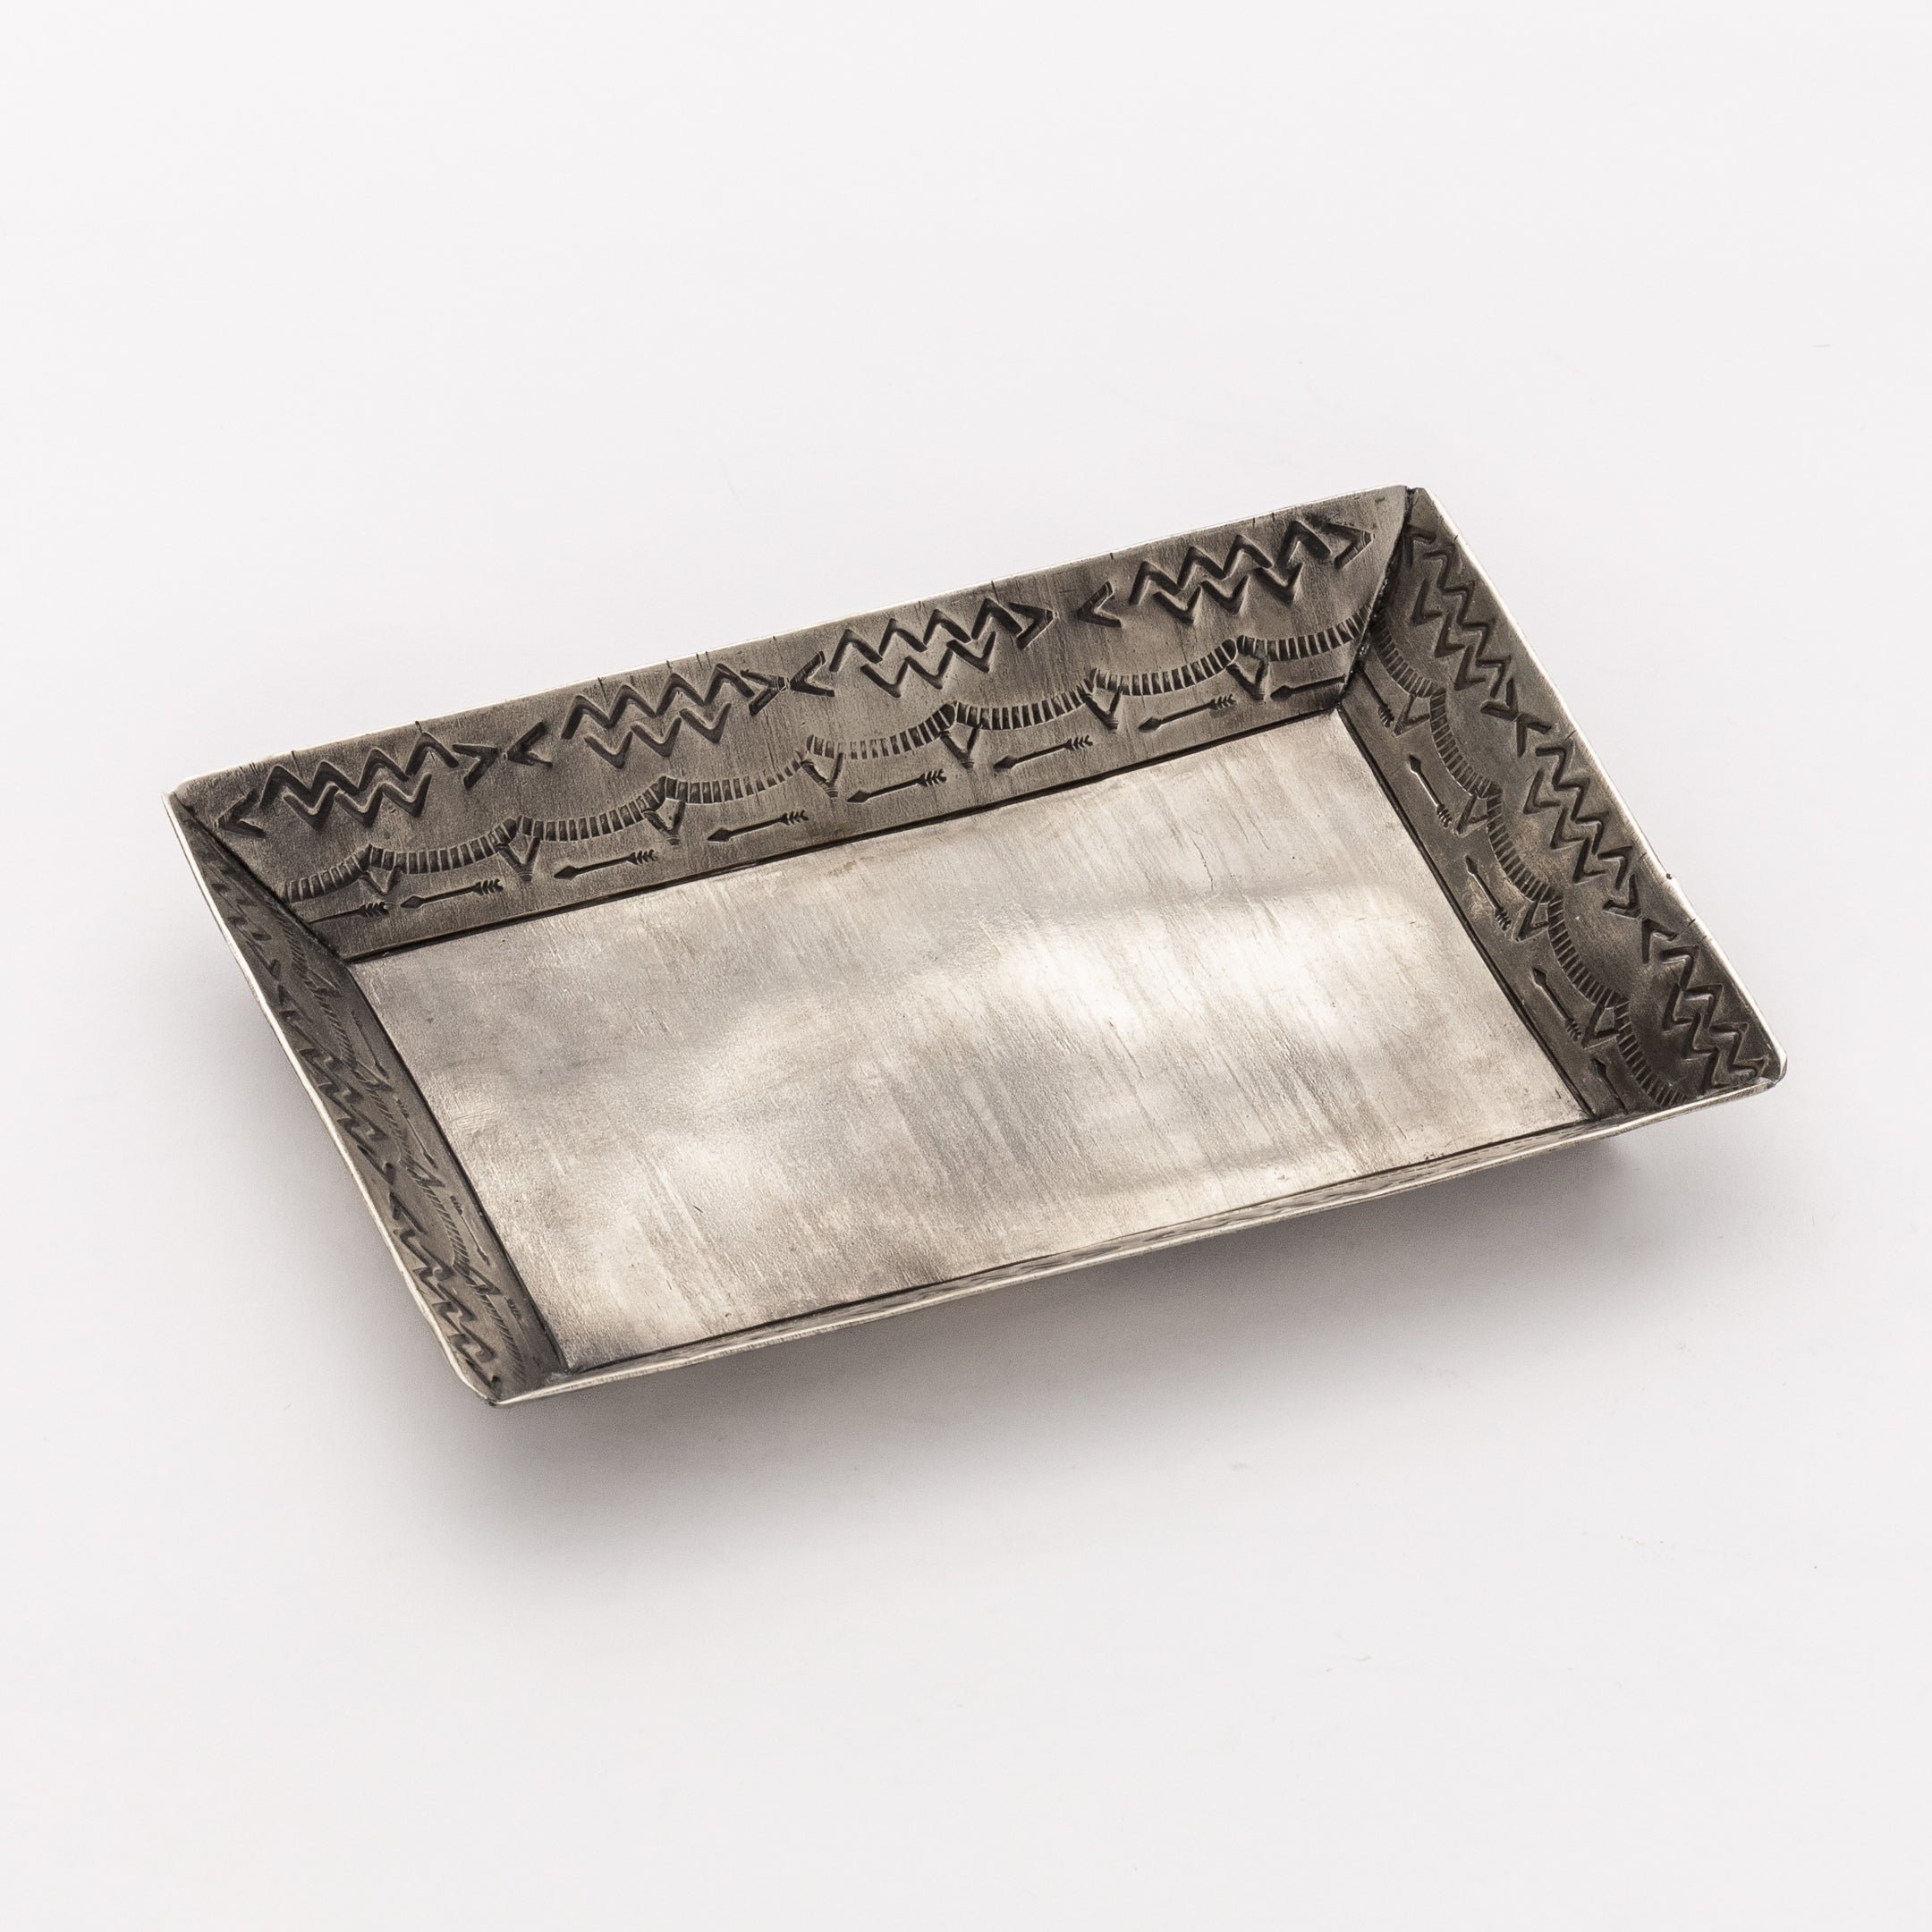 WJA-022 SMALL STAMPED TRAY